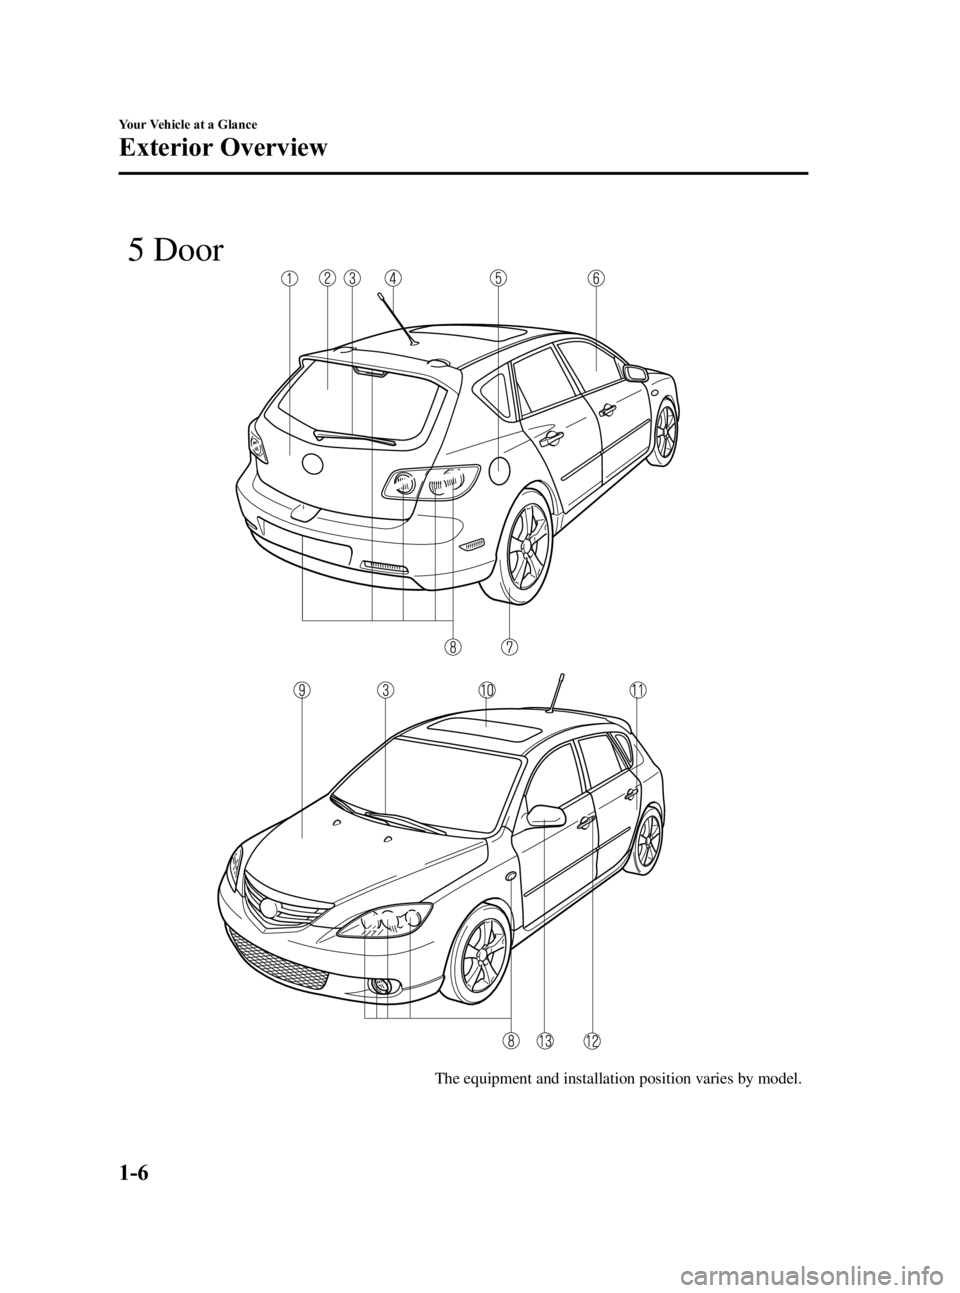 MAZDA MODEL 3 5-DOOR 2006 User Guide Black plate (12,1)
The equipment and installation position varies by model.
 5 Door
1-6
Your Vehicle at a Glance
Exterior Overview
Mazda3_8U55-EA-05G_Edition3 Page12
Tuesday, September 13 2005 10:40 A